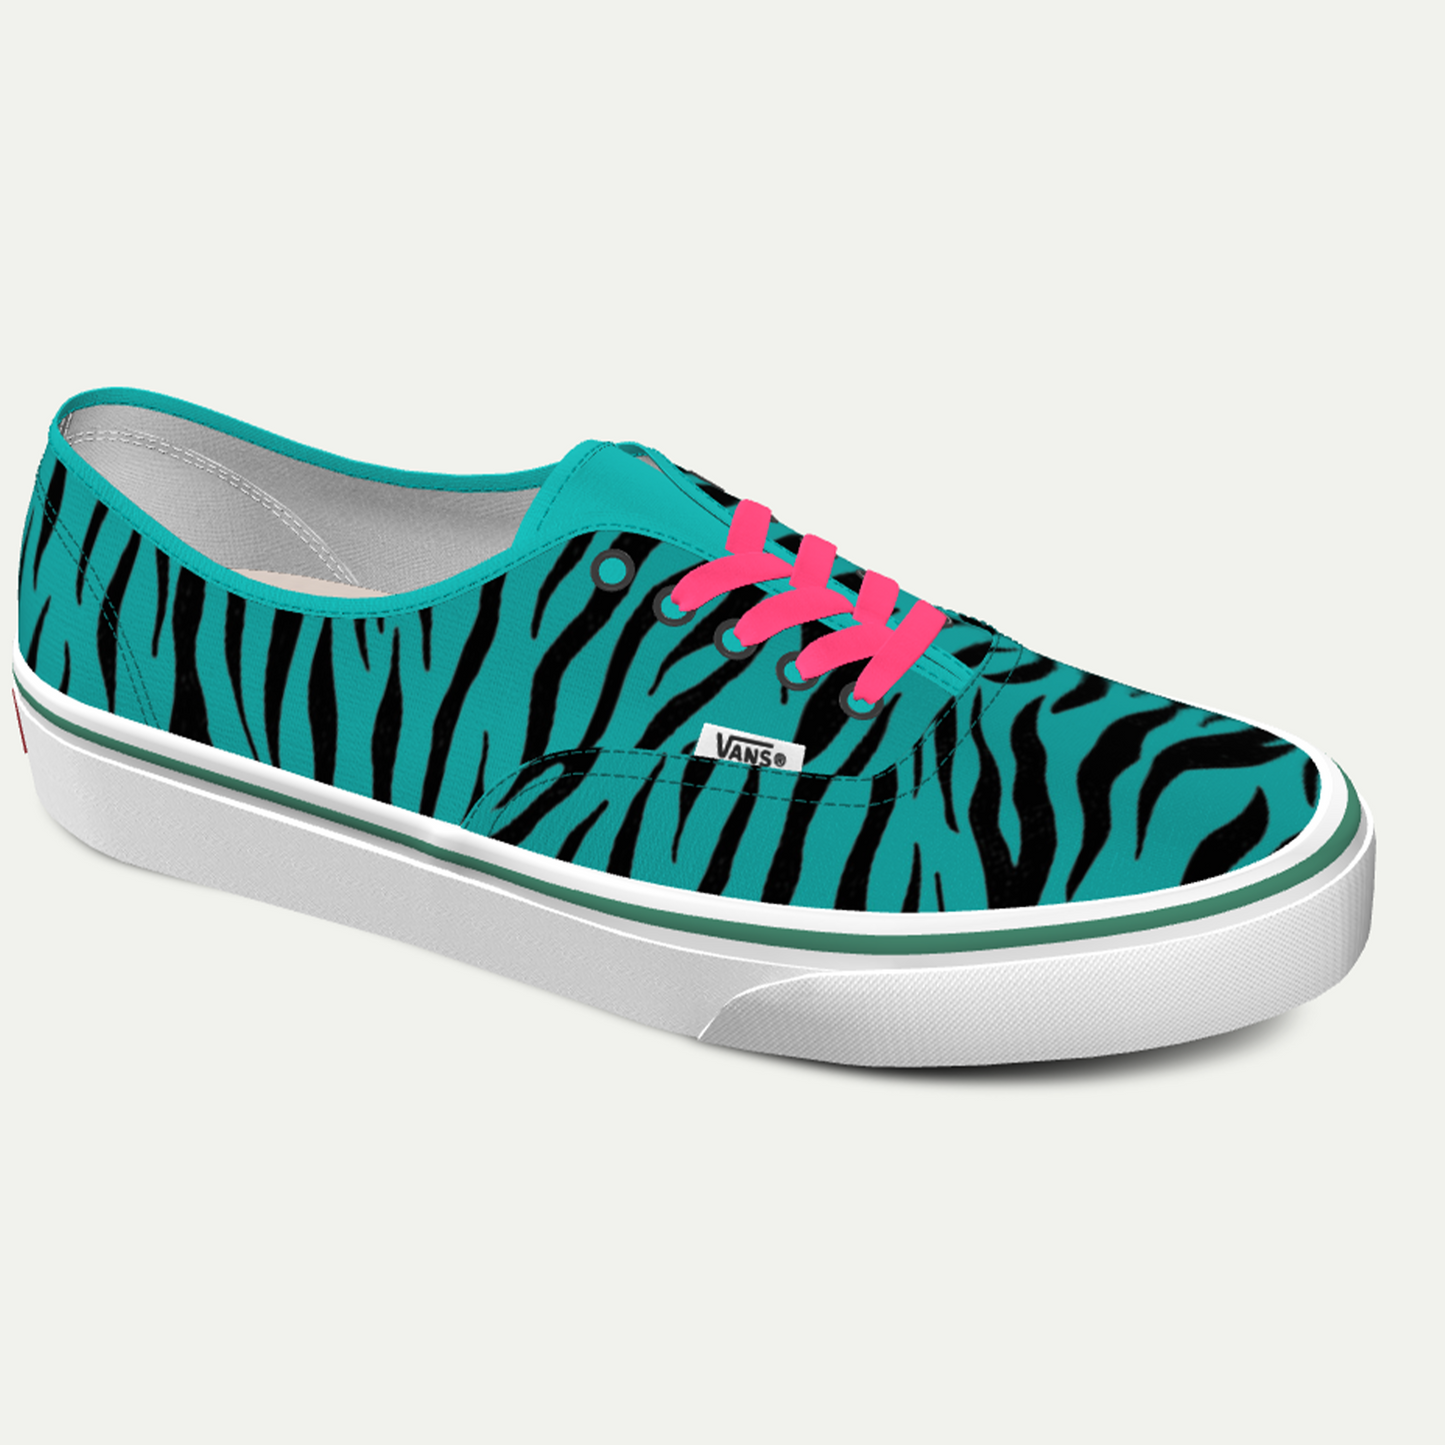 Funky Yeti x Vans Customs Authentic Shoes - Tiger TEALicious